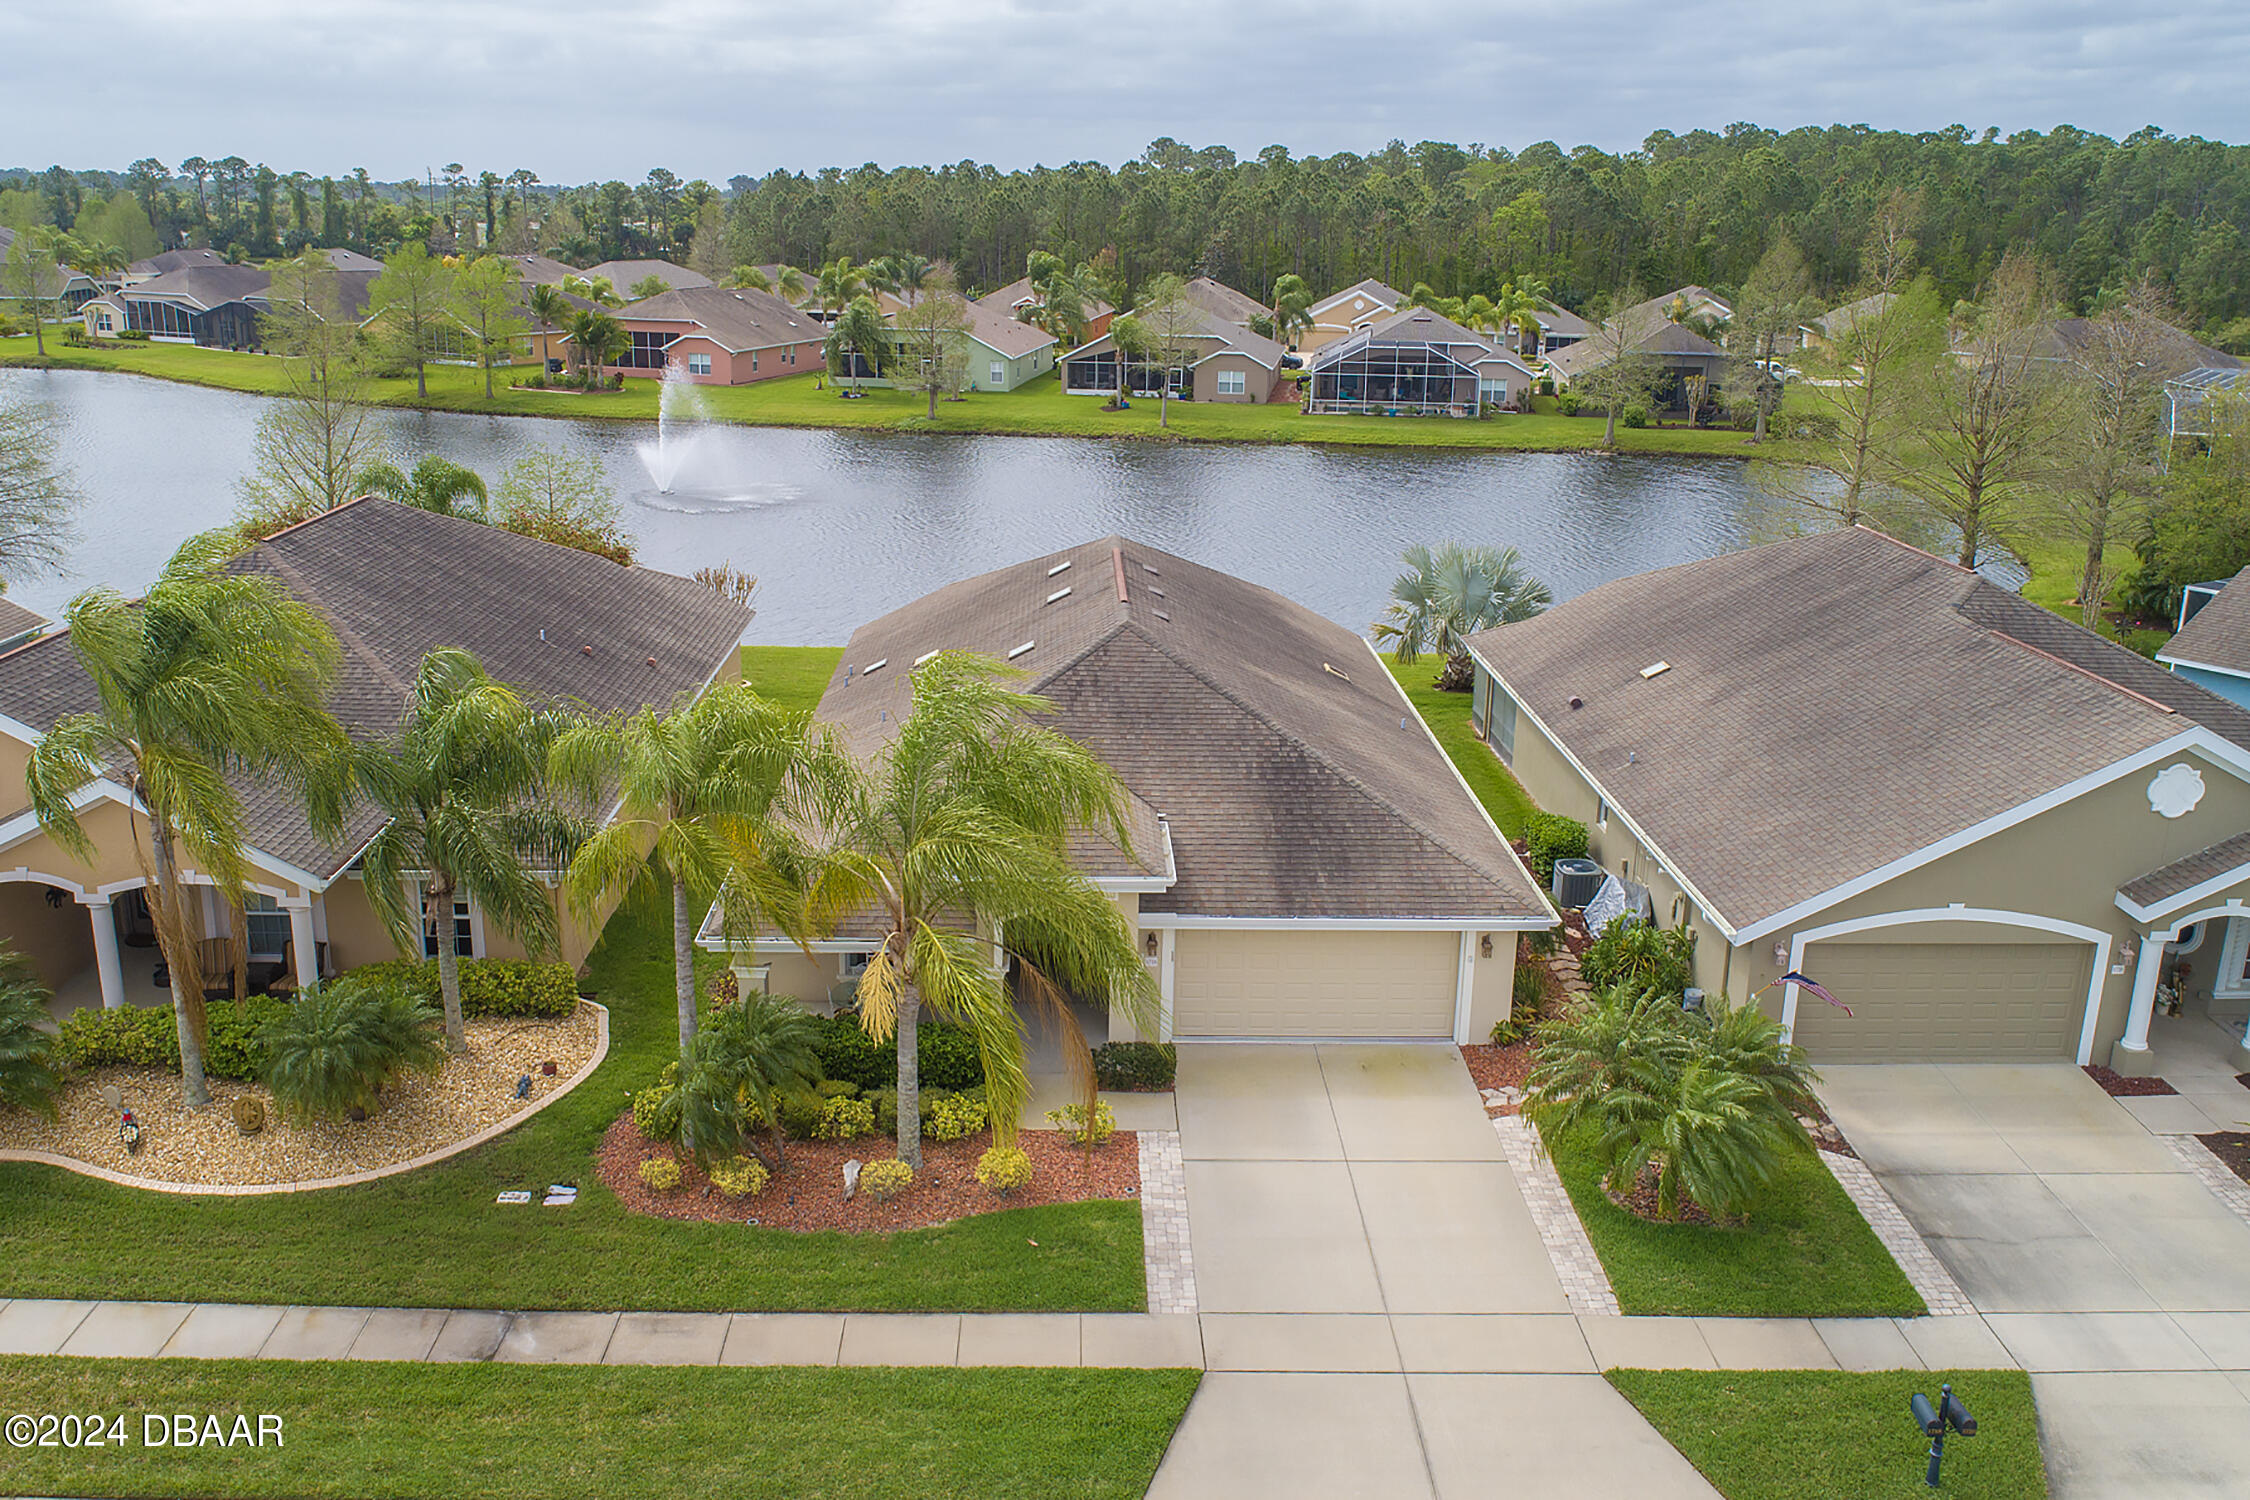 an aerial view of residential houses with outdoor space and lake view